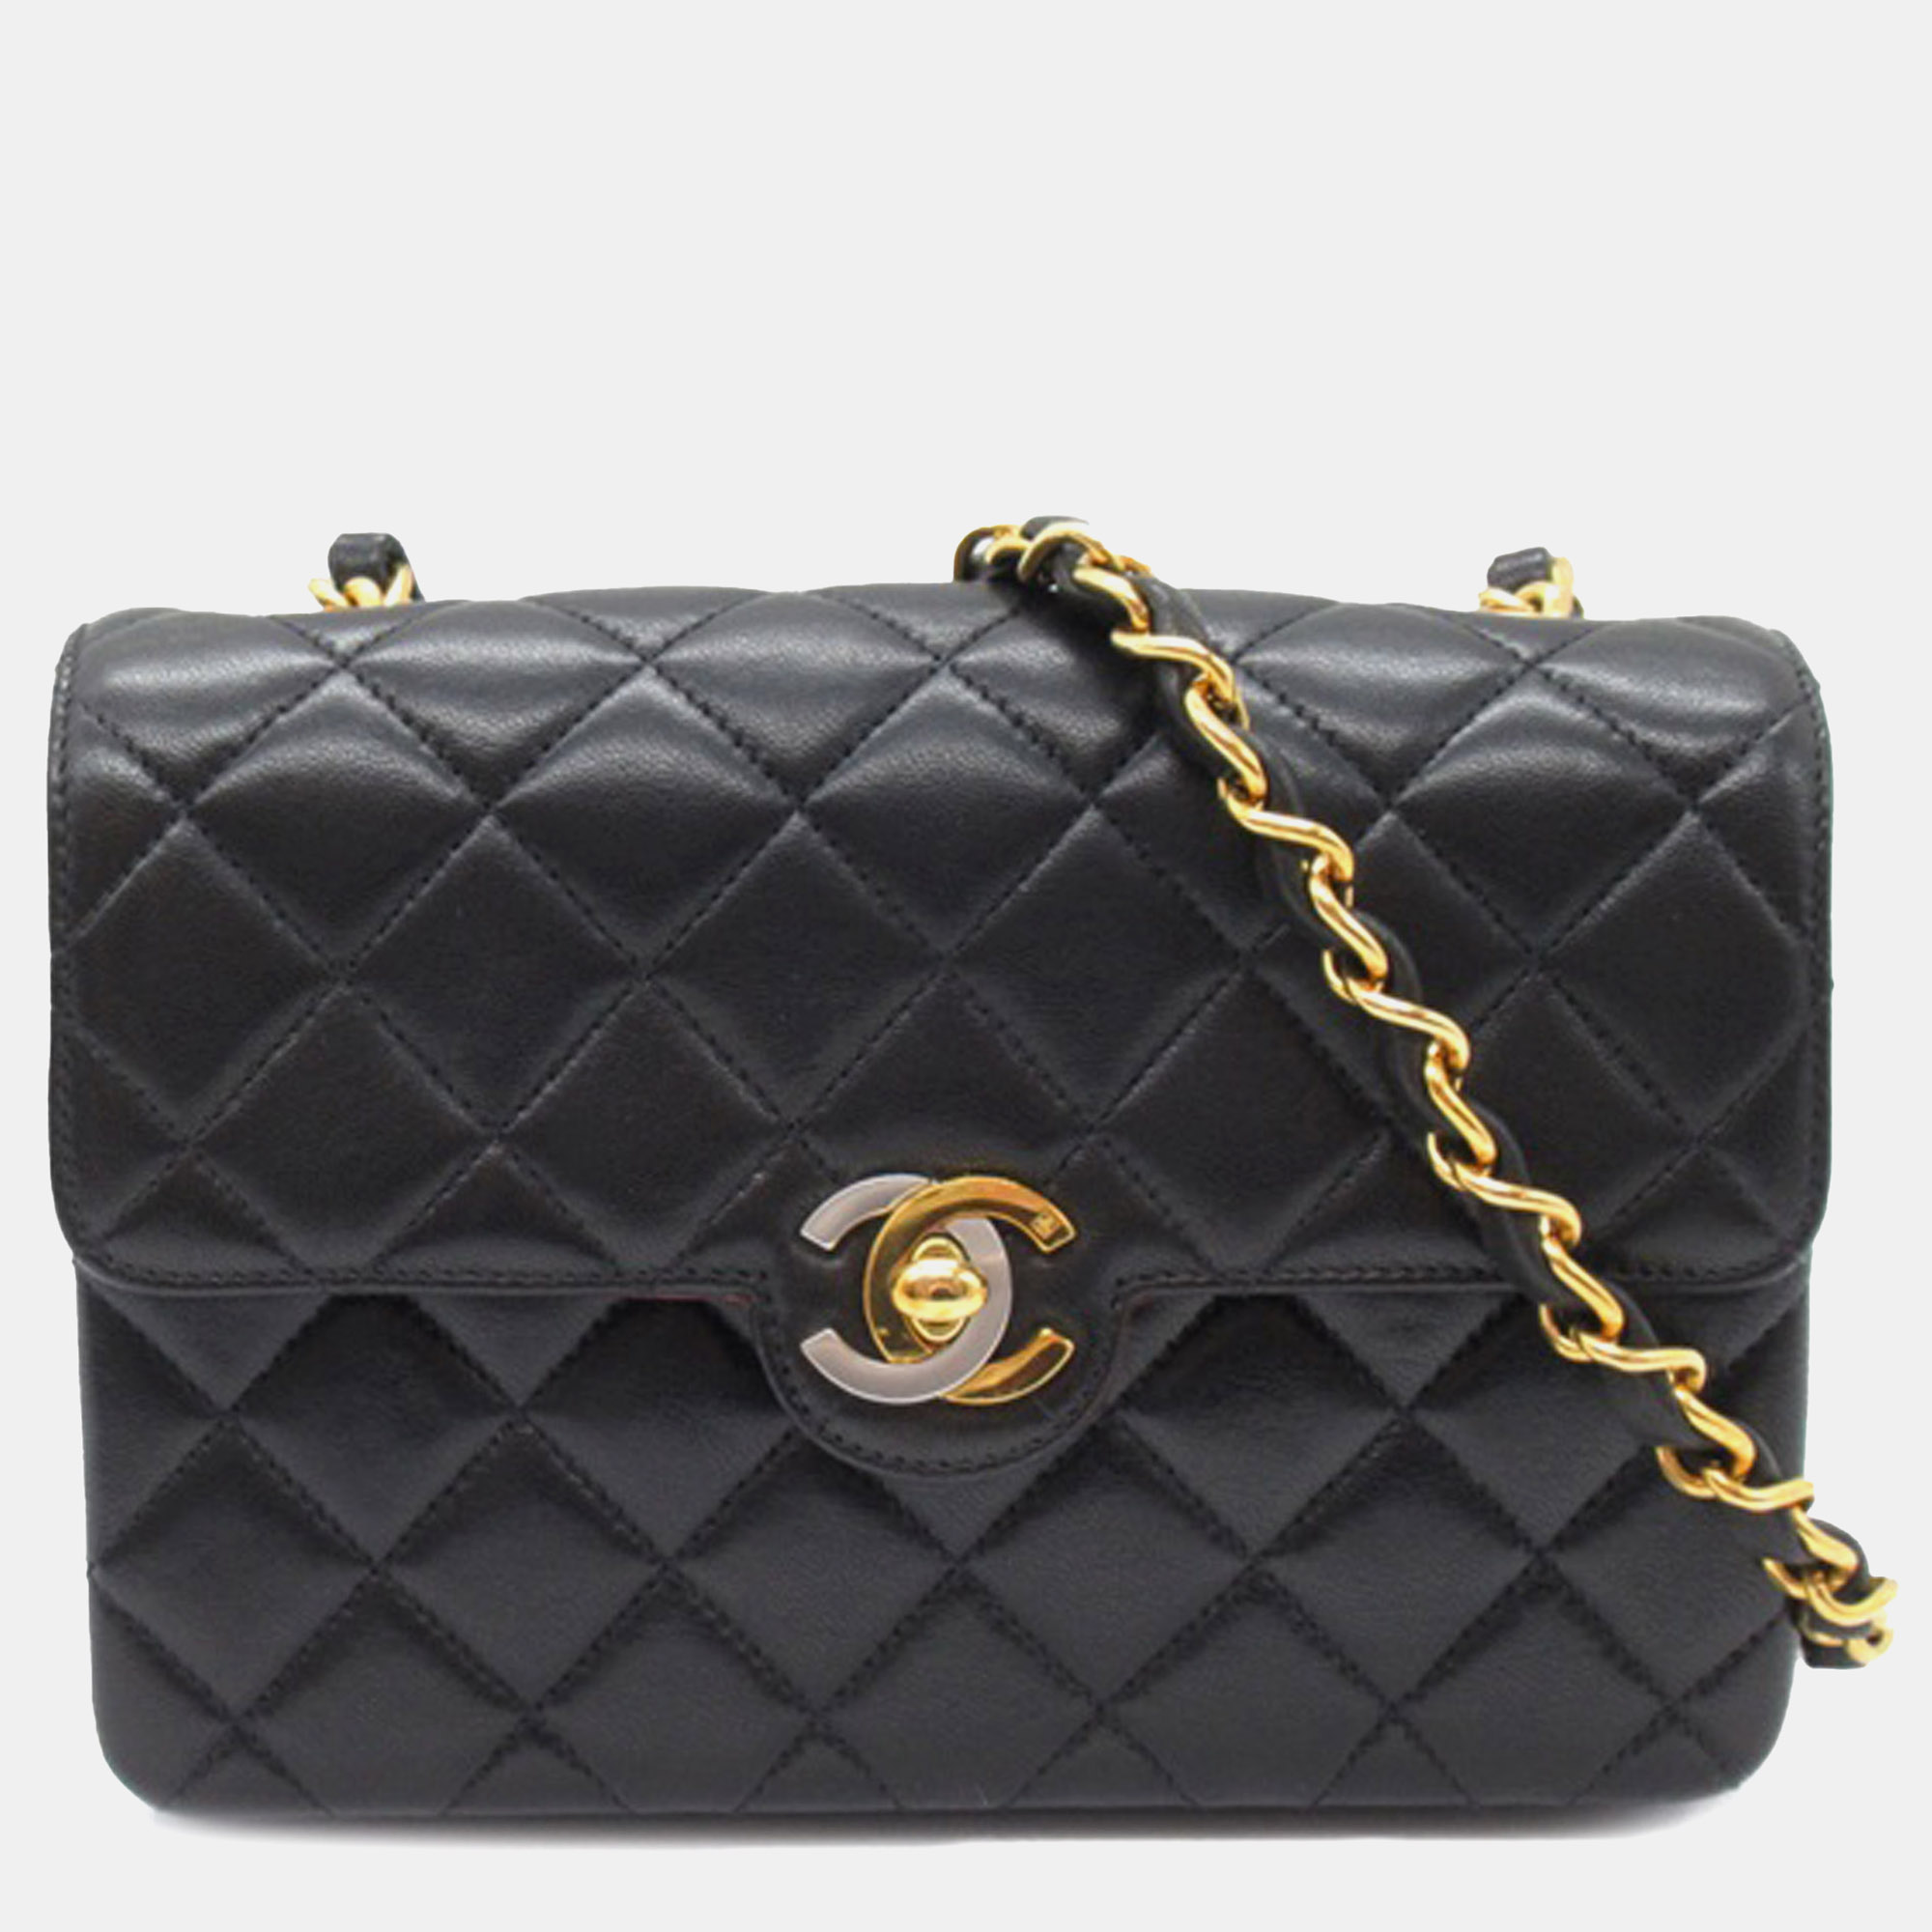 

Chanel Mini CC Quilted Lambskin Leather Crossbody Bag, Black